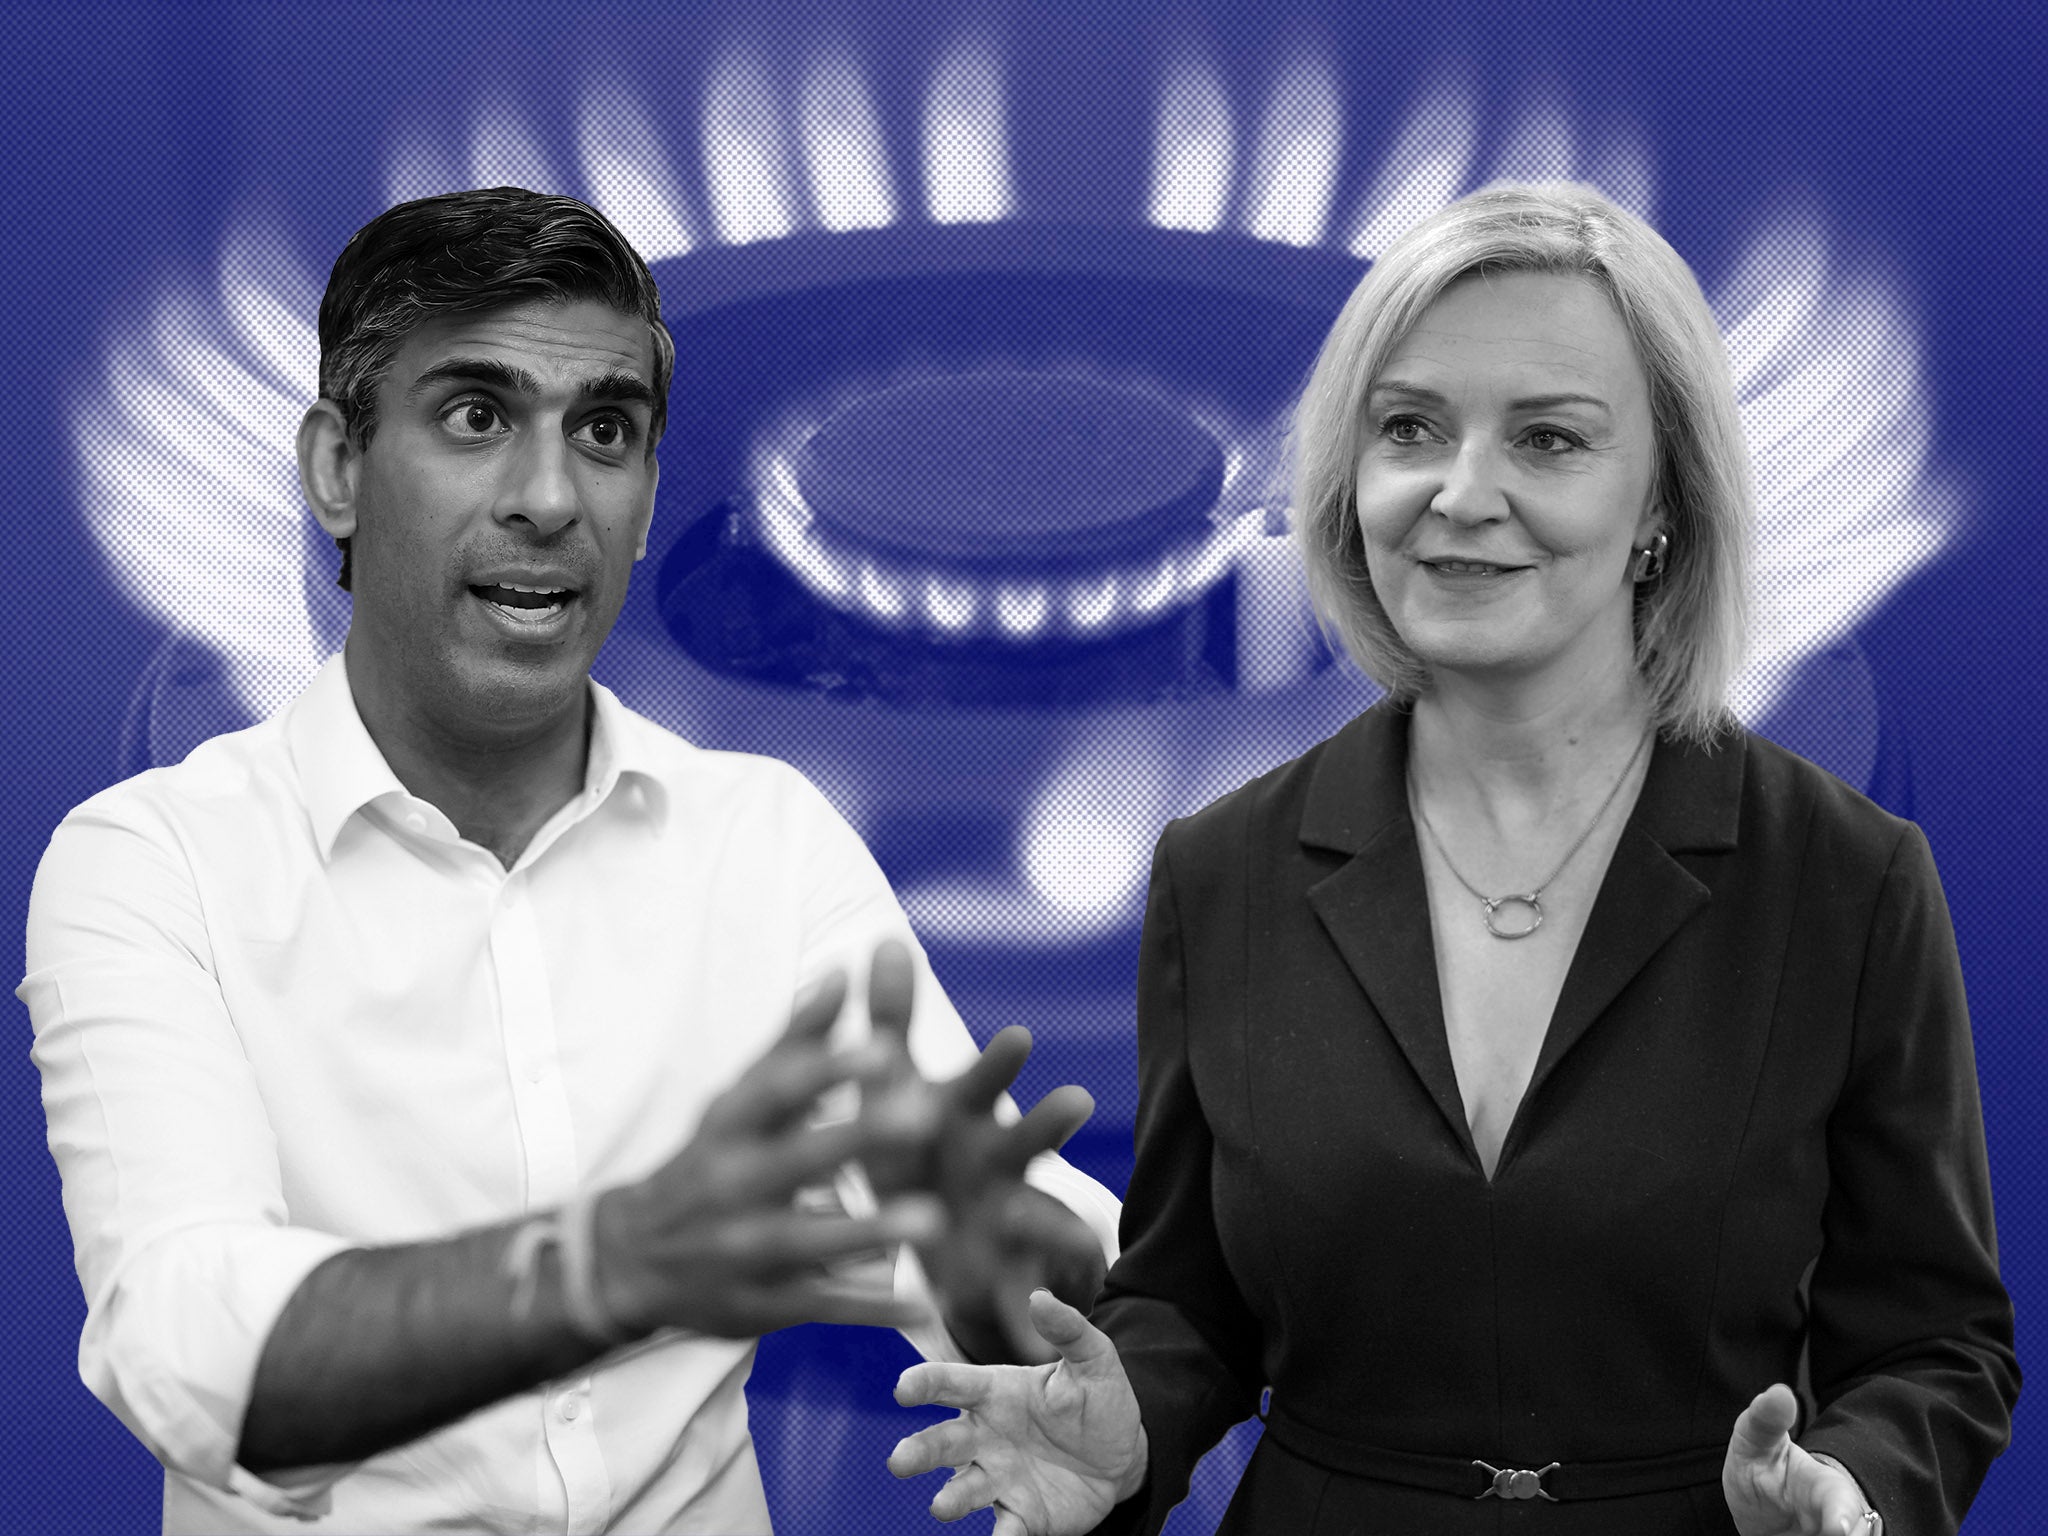 There is no guarantee that Tory leadership candidates Rishi Sunak or Liz Truss would introduce the scheme